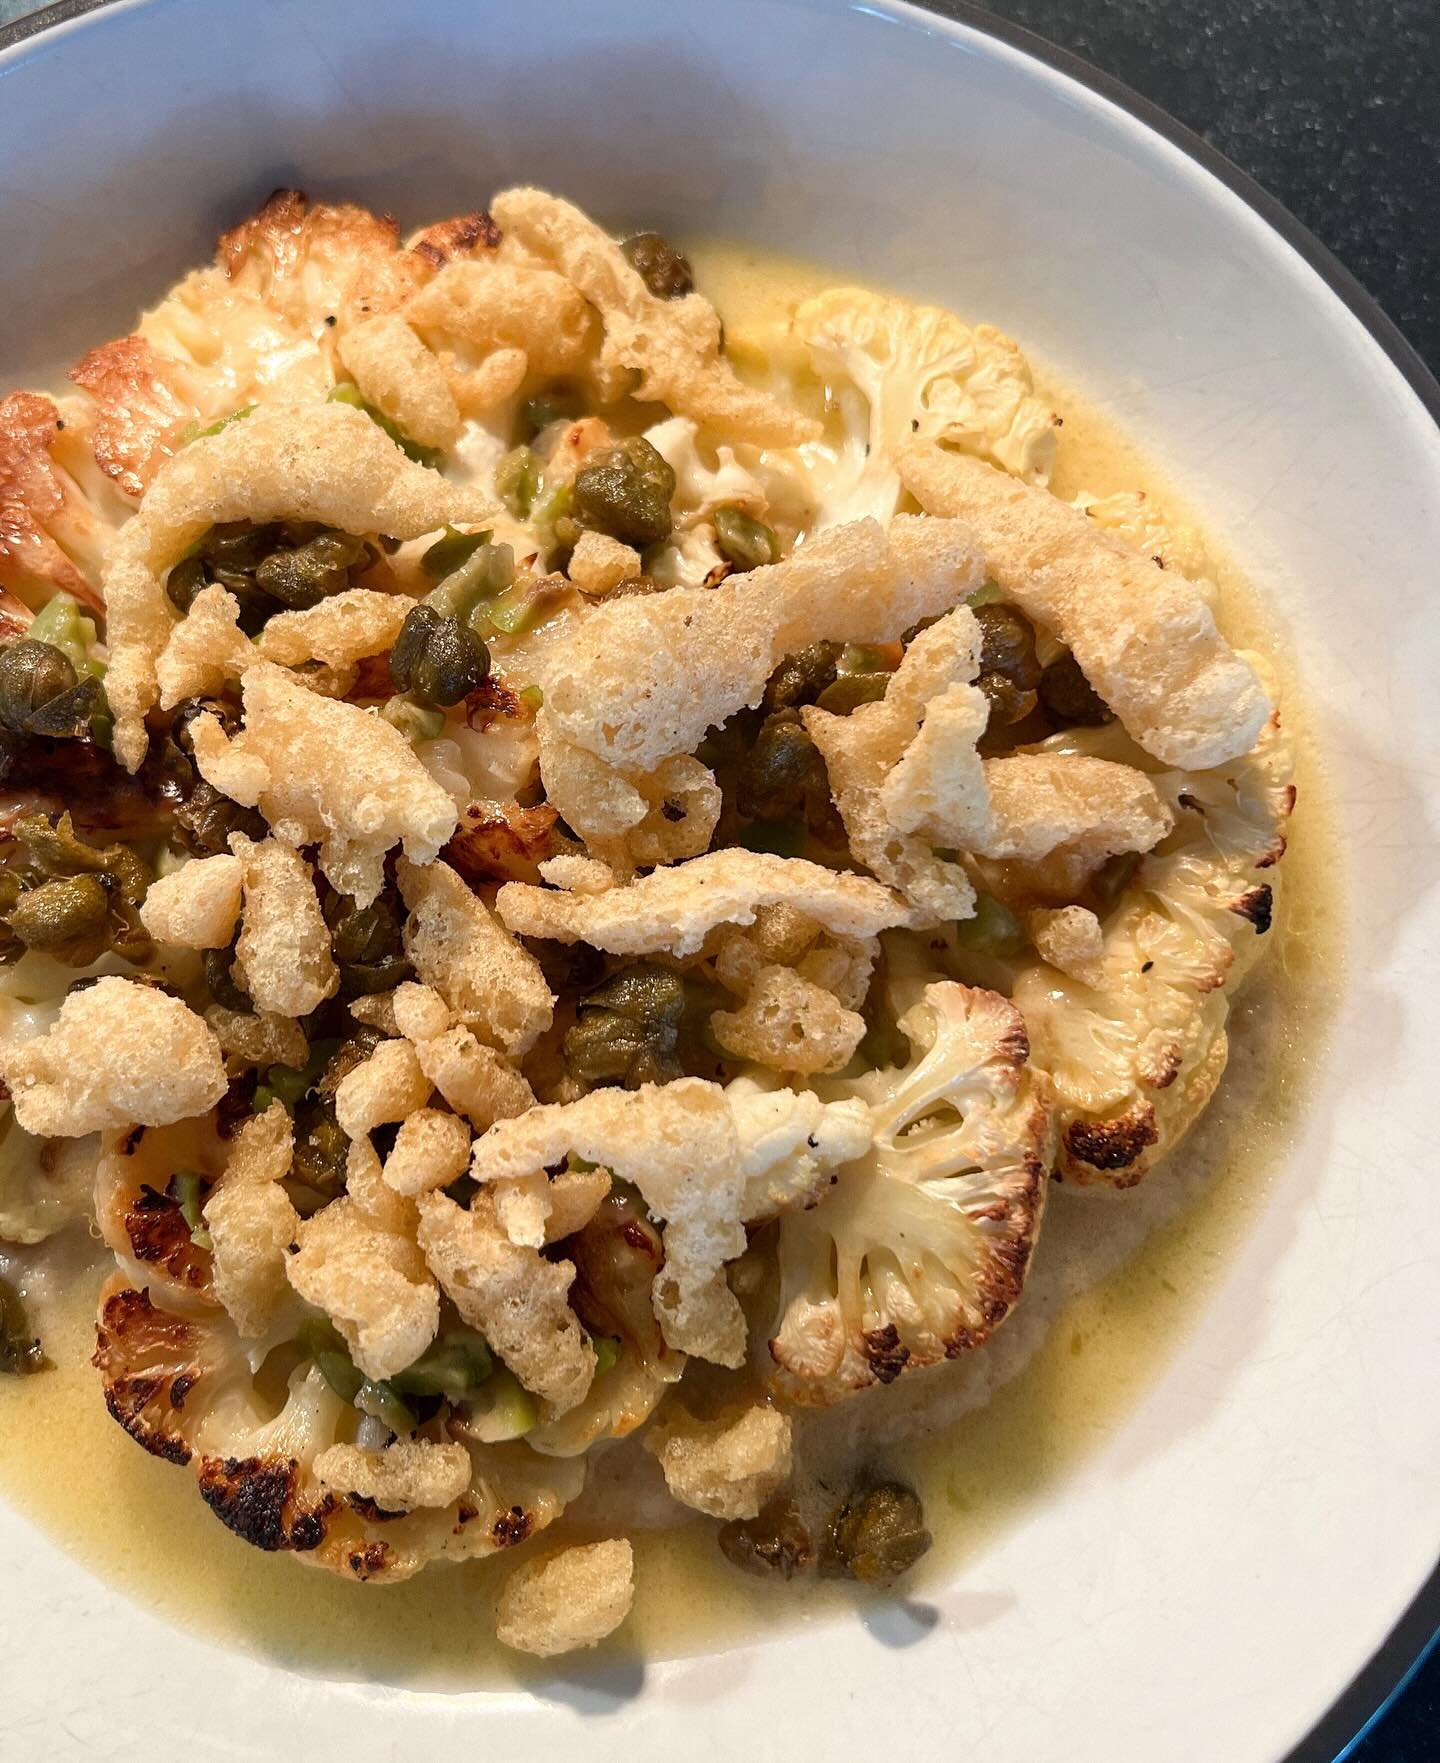 To share or not to share?

CAULIFLOWER PICATTA 🍋🌿 

Roasted cauliflower steak, sunchoke pur&eacute;e, castelvetrano beurre blanc, fried capers, tempura crunch 

Available on our dinner menu starting at 4:30pm!